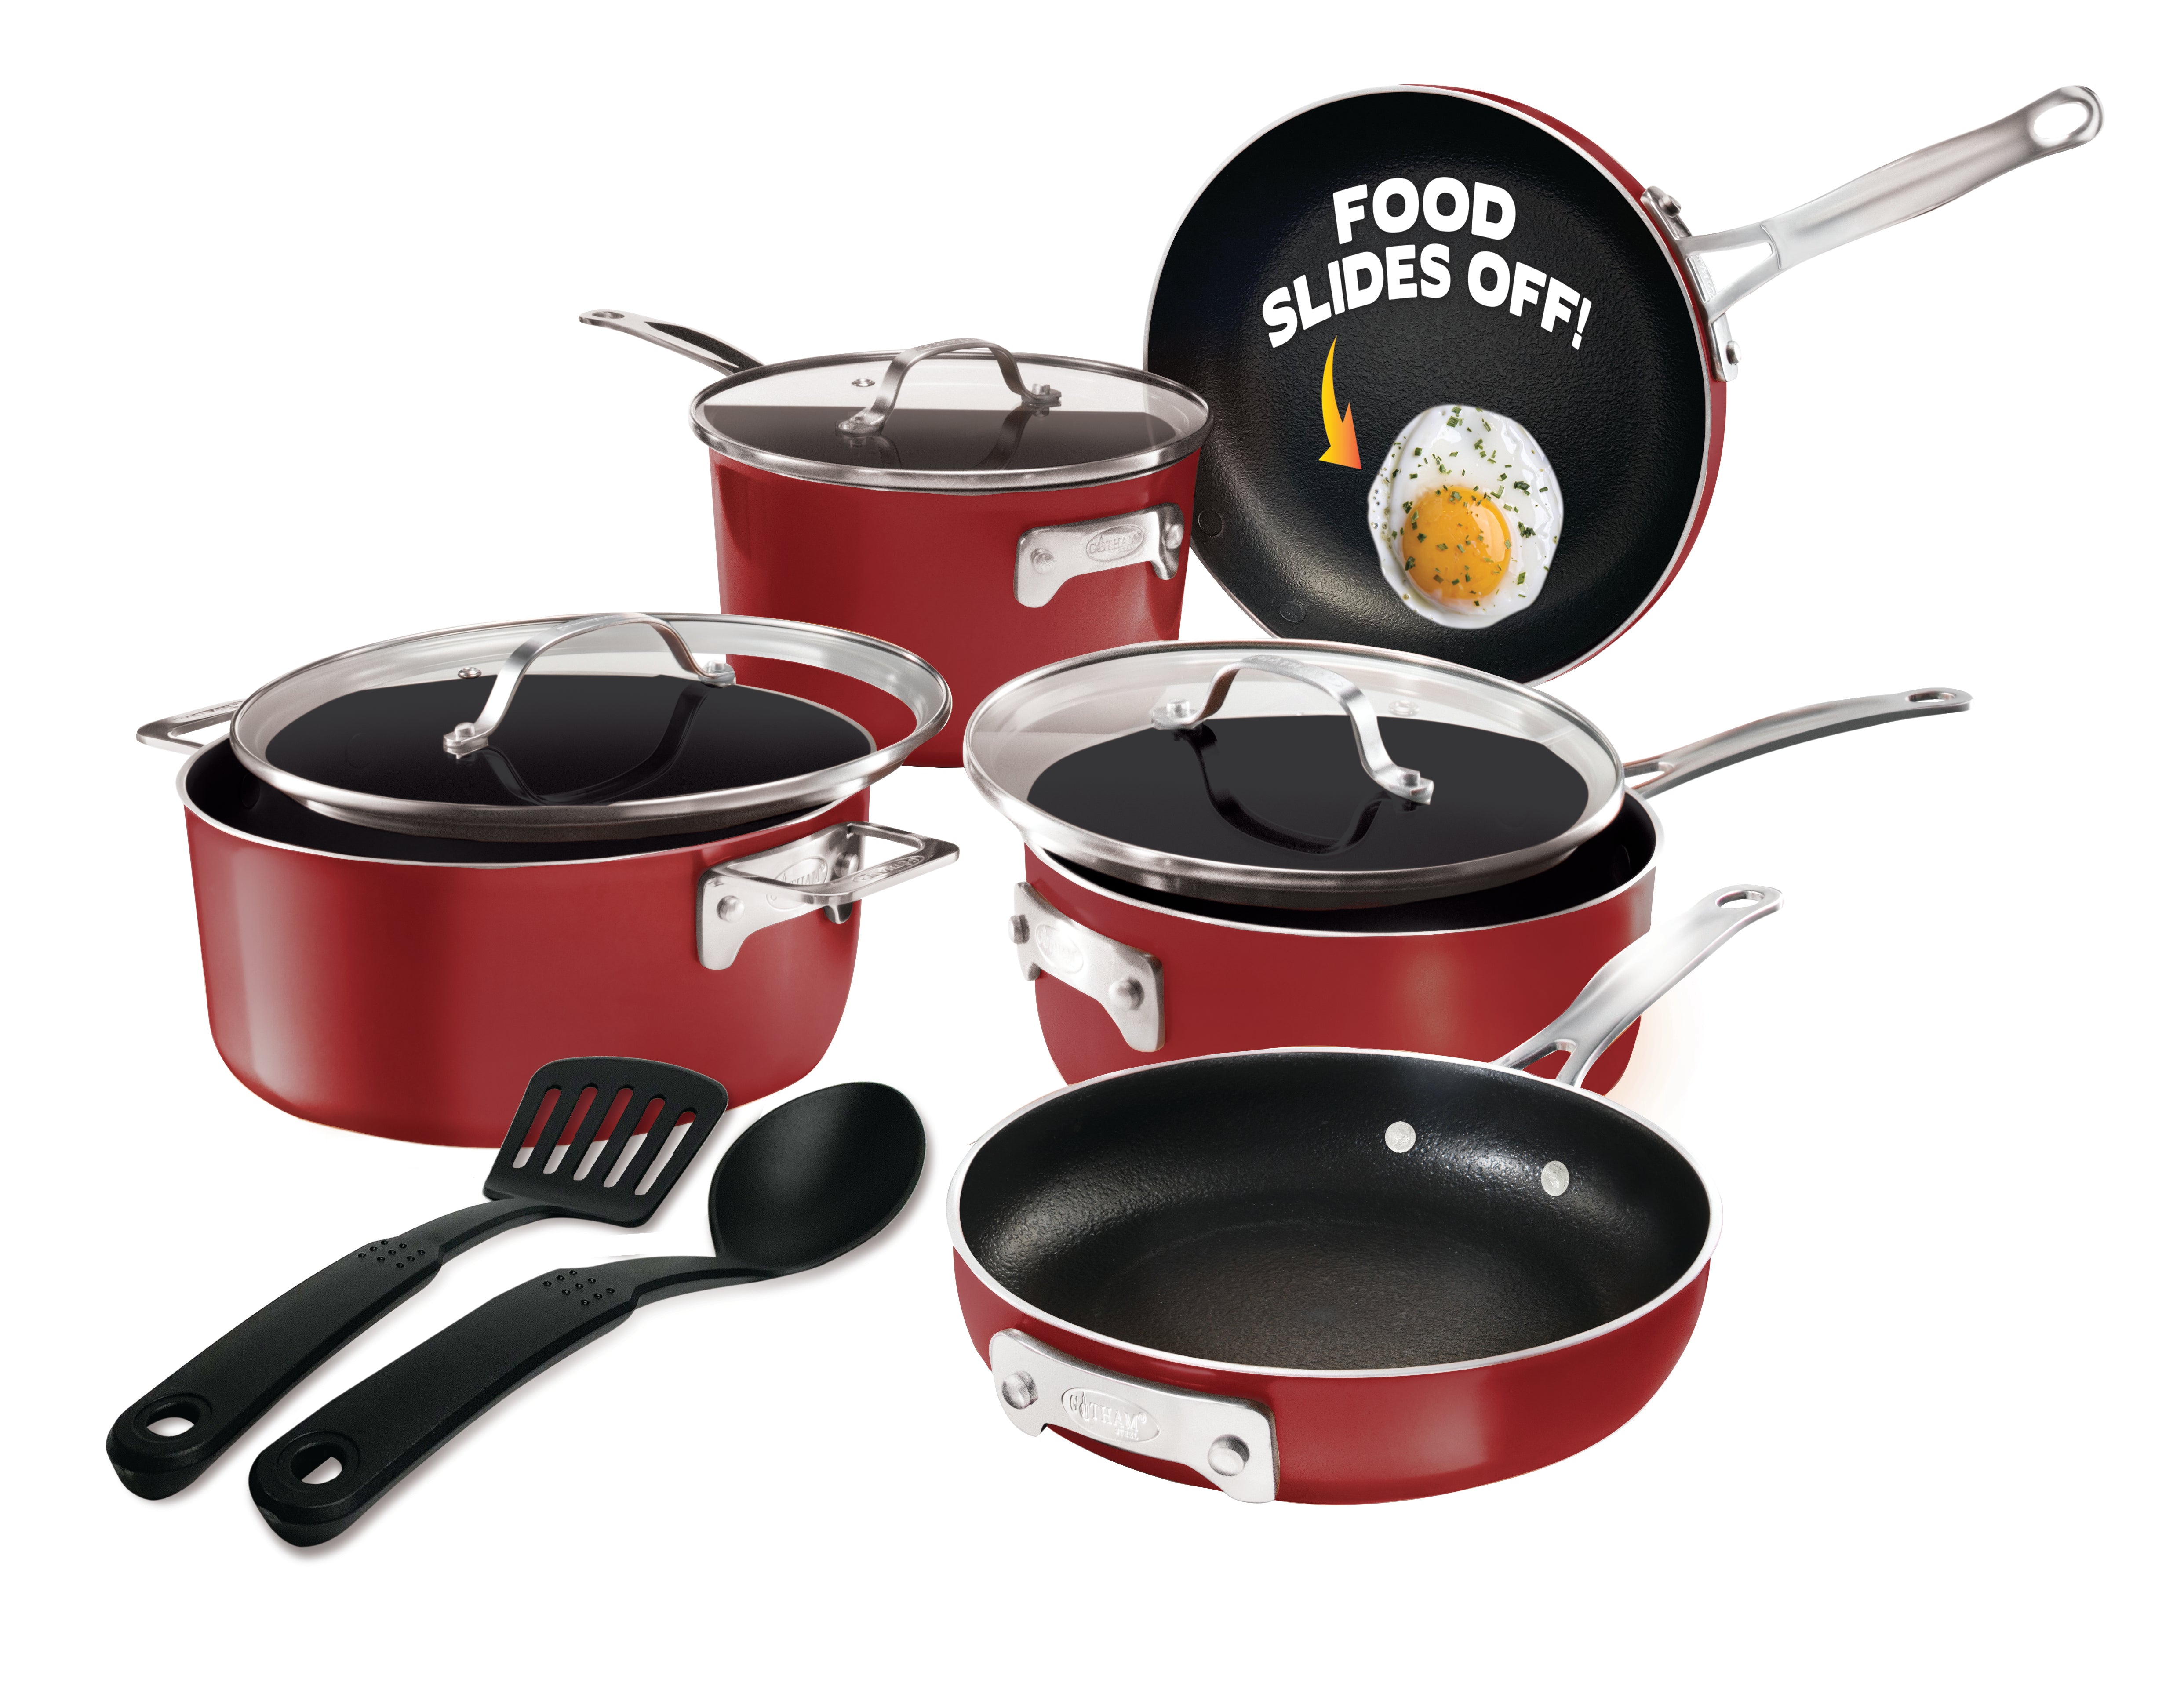 Refresh your pots and pans with Gotham's 10-piece Stackable